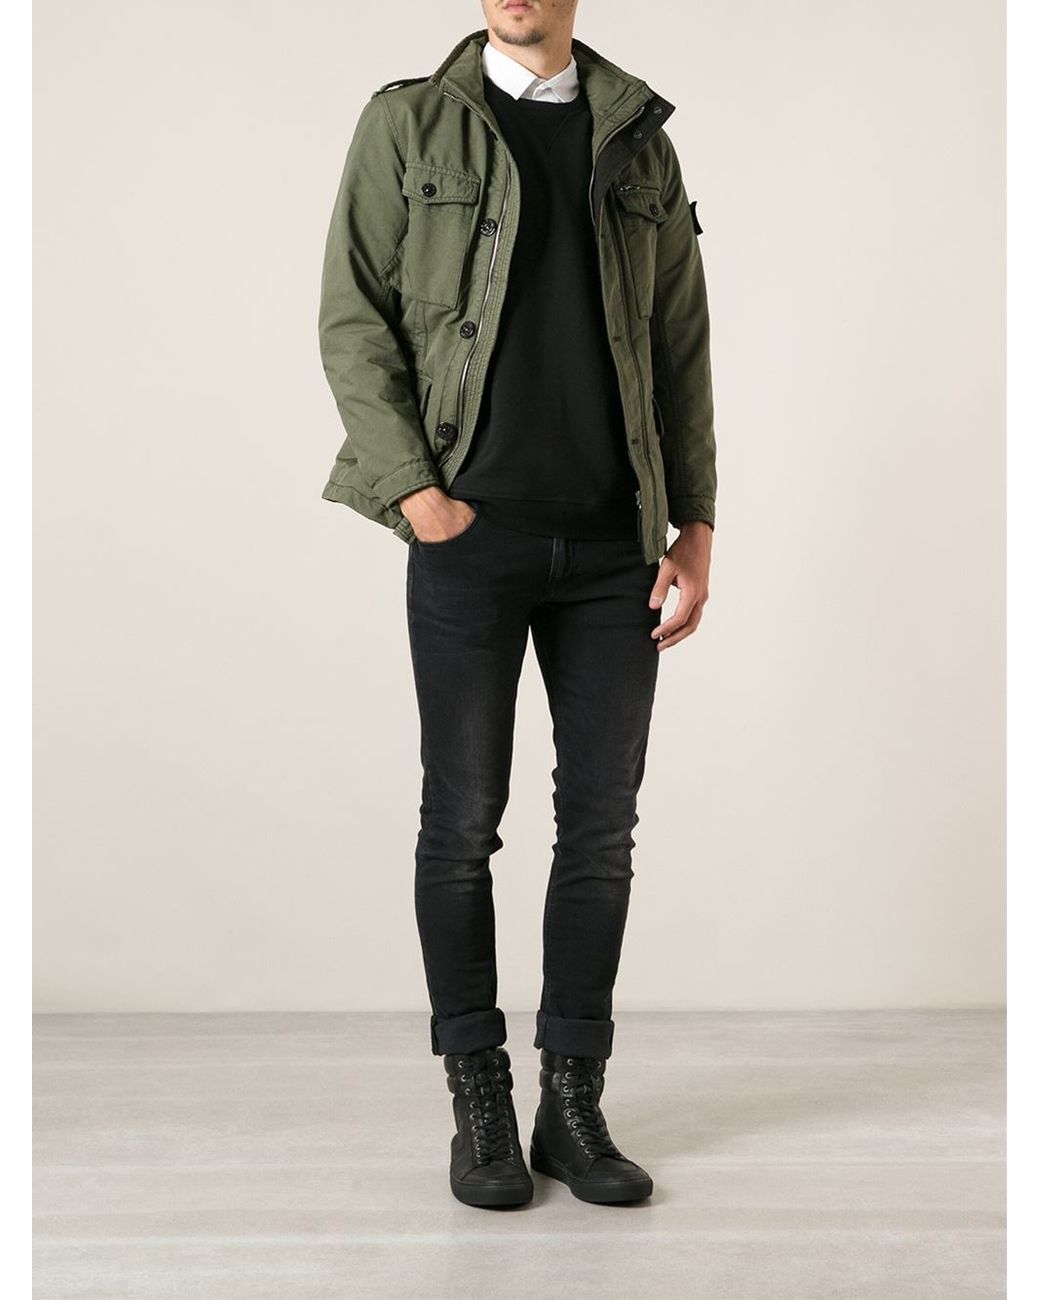 Stone Island Military Jacket in Green for Men | Lyst UK